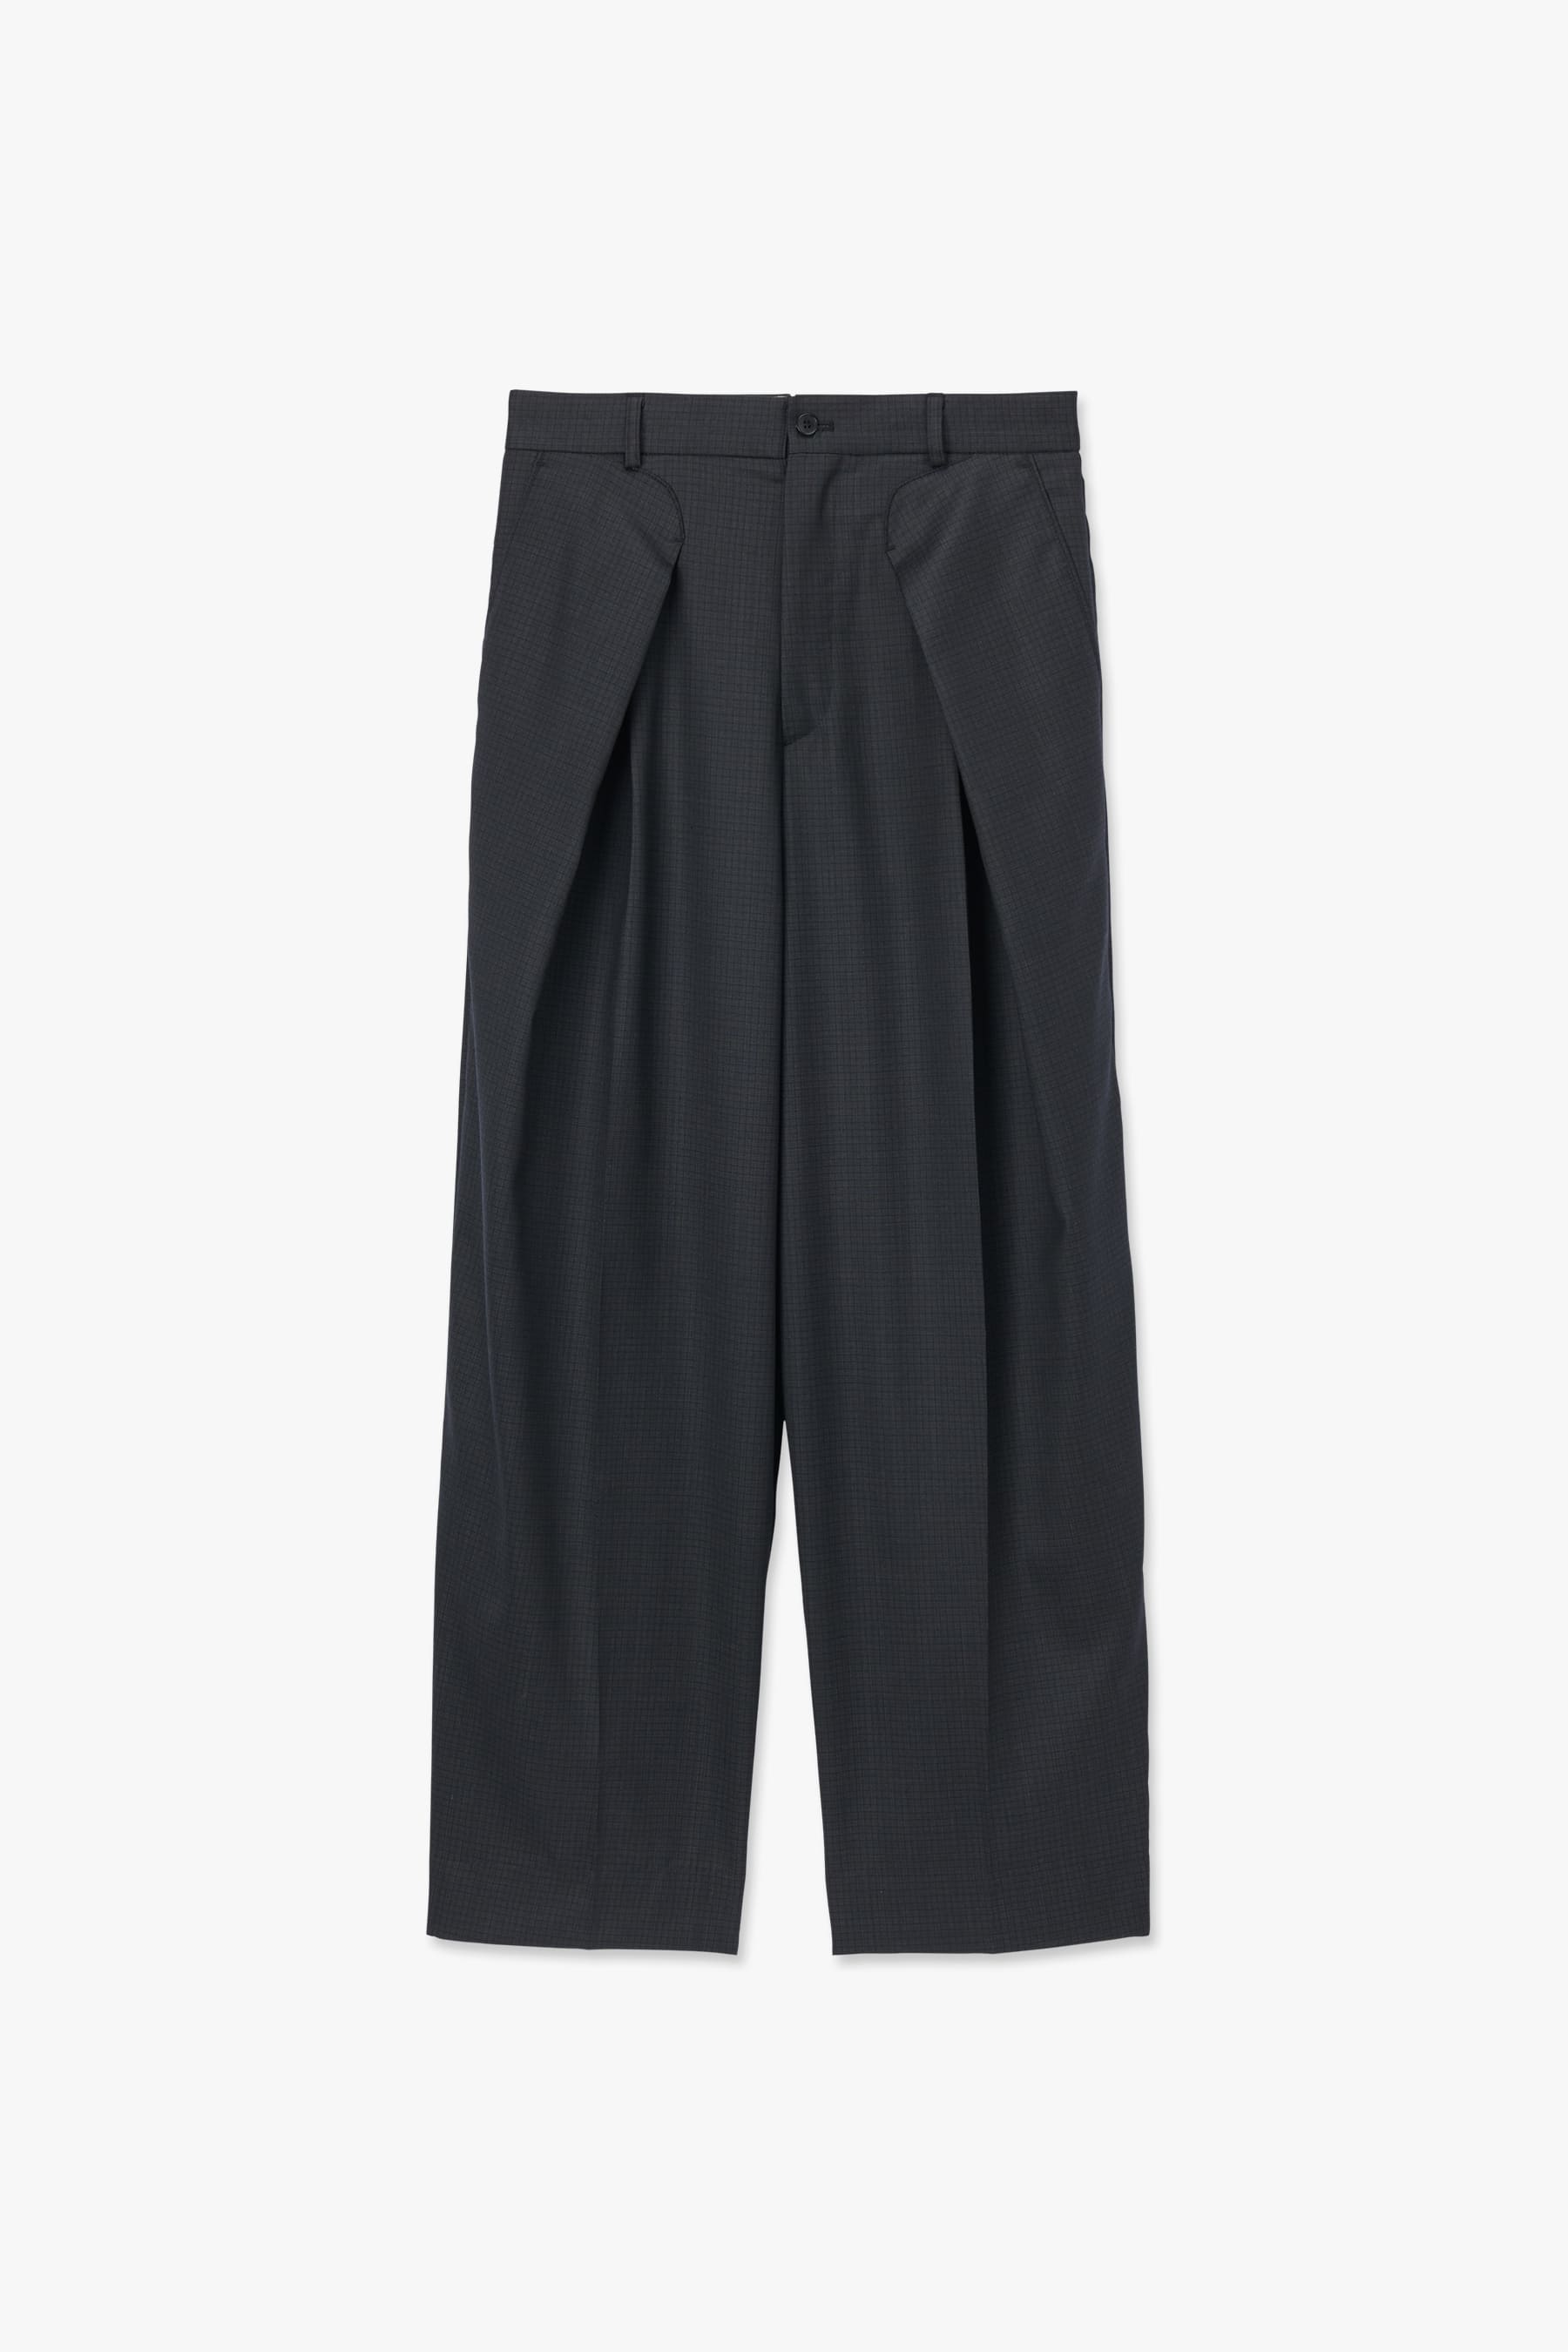 WOOL BLACK CHECK OVERLAP TWO TUCK WIDE PANTS